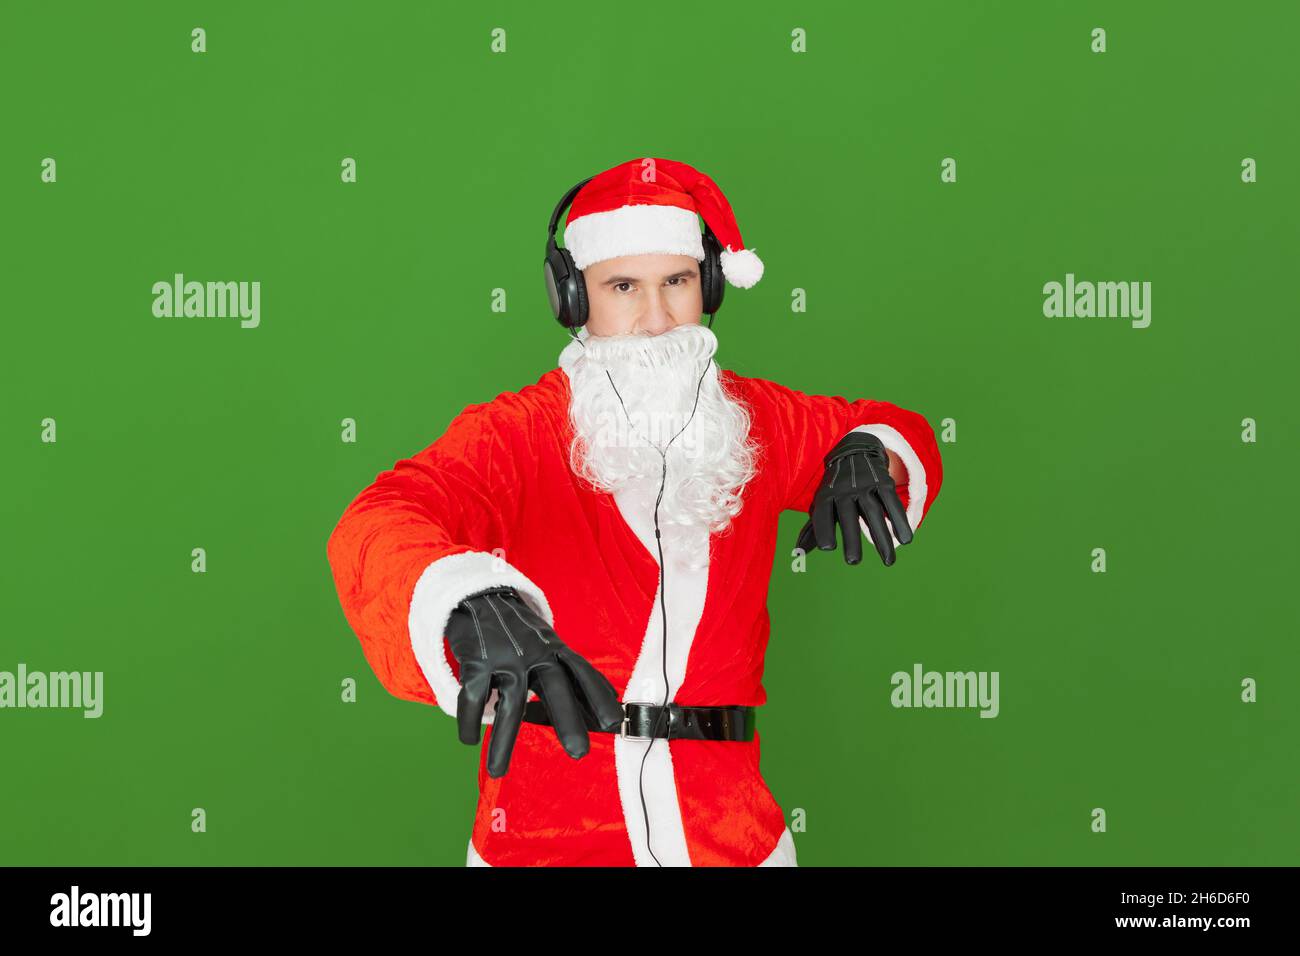 An adult Caucasian man dressed as Santa Claus with headphones is imitating a disc jockey pretending to move the records and volume control in the air. Stock Photo